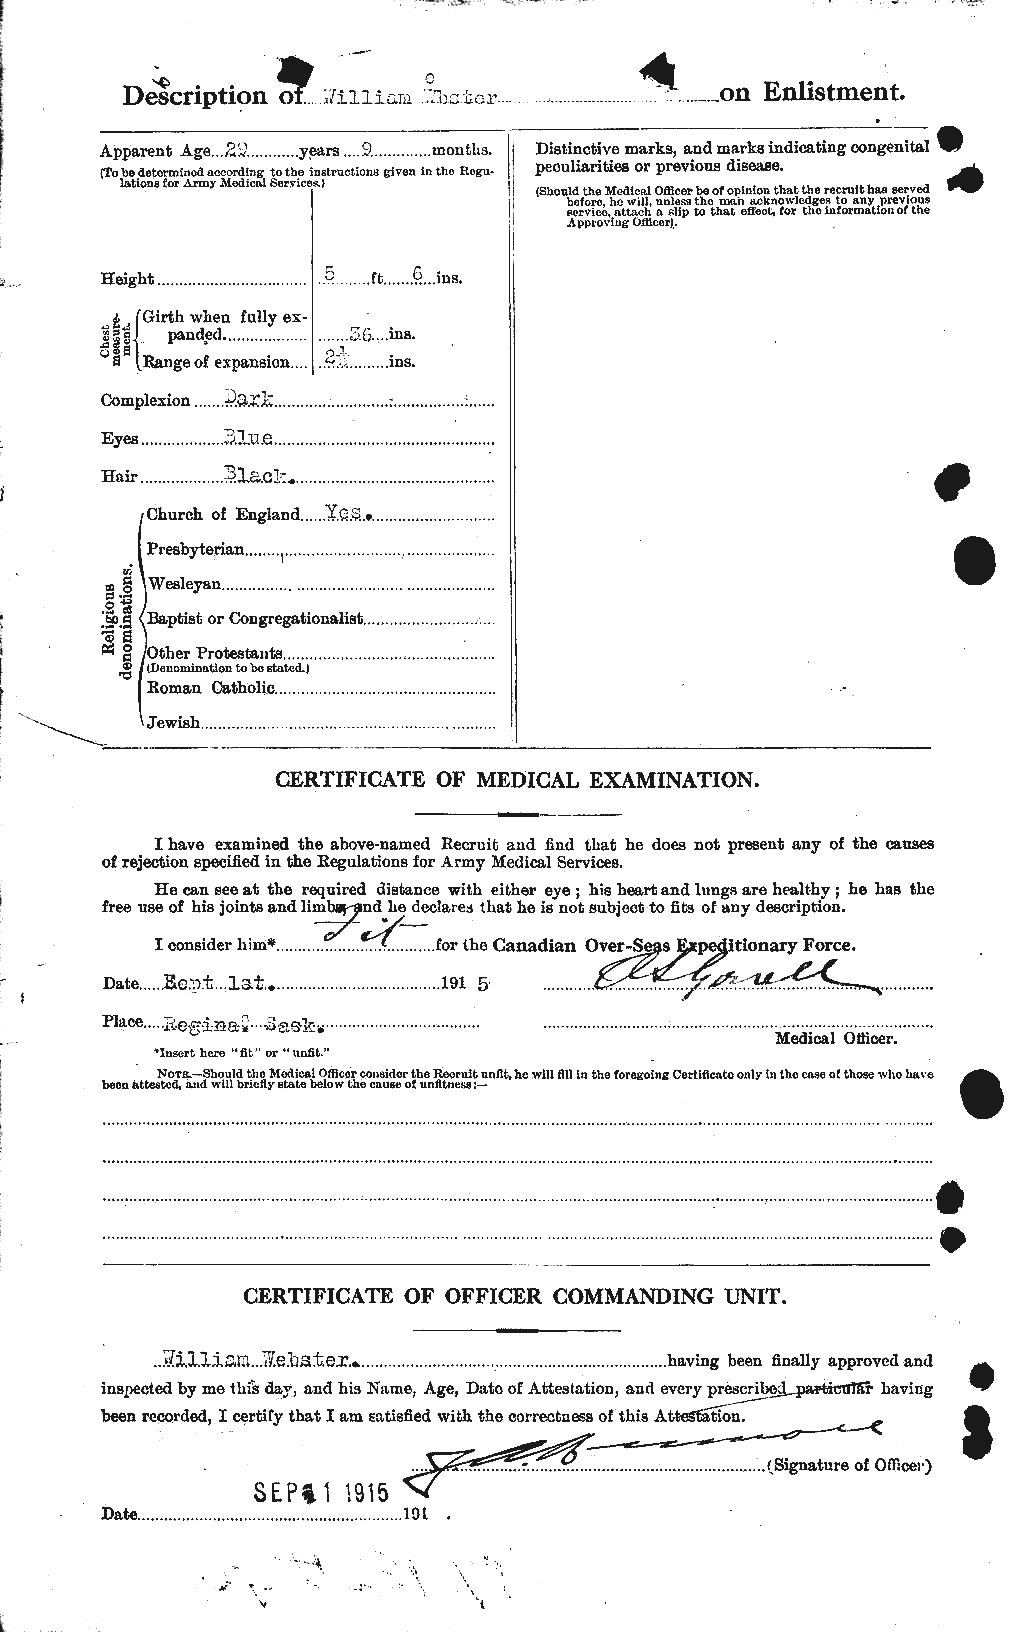 Personnel Records of the First World War - CEF 662021b